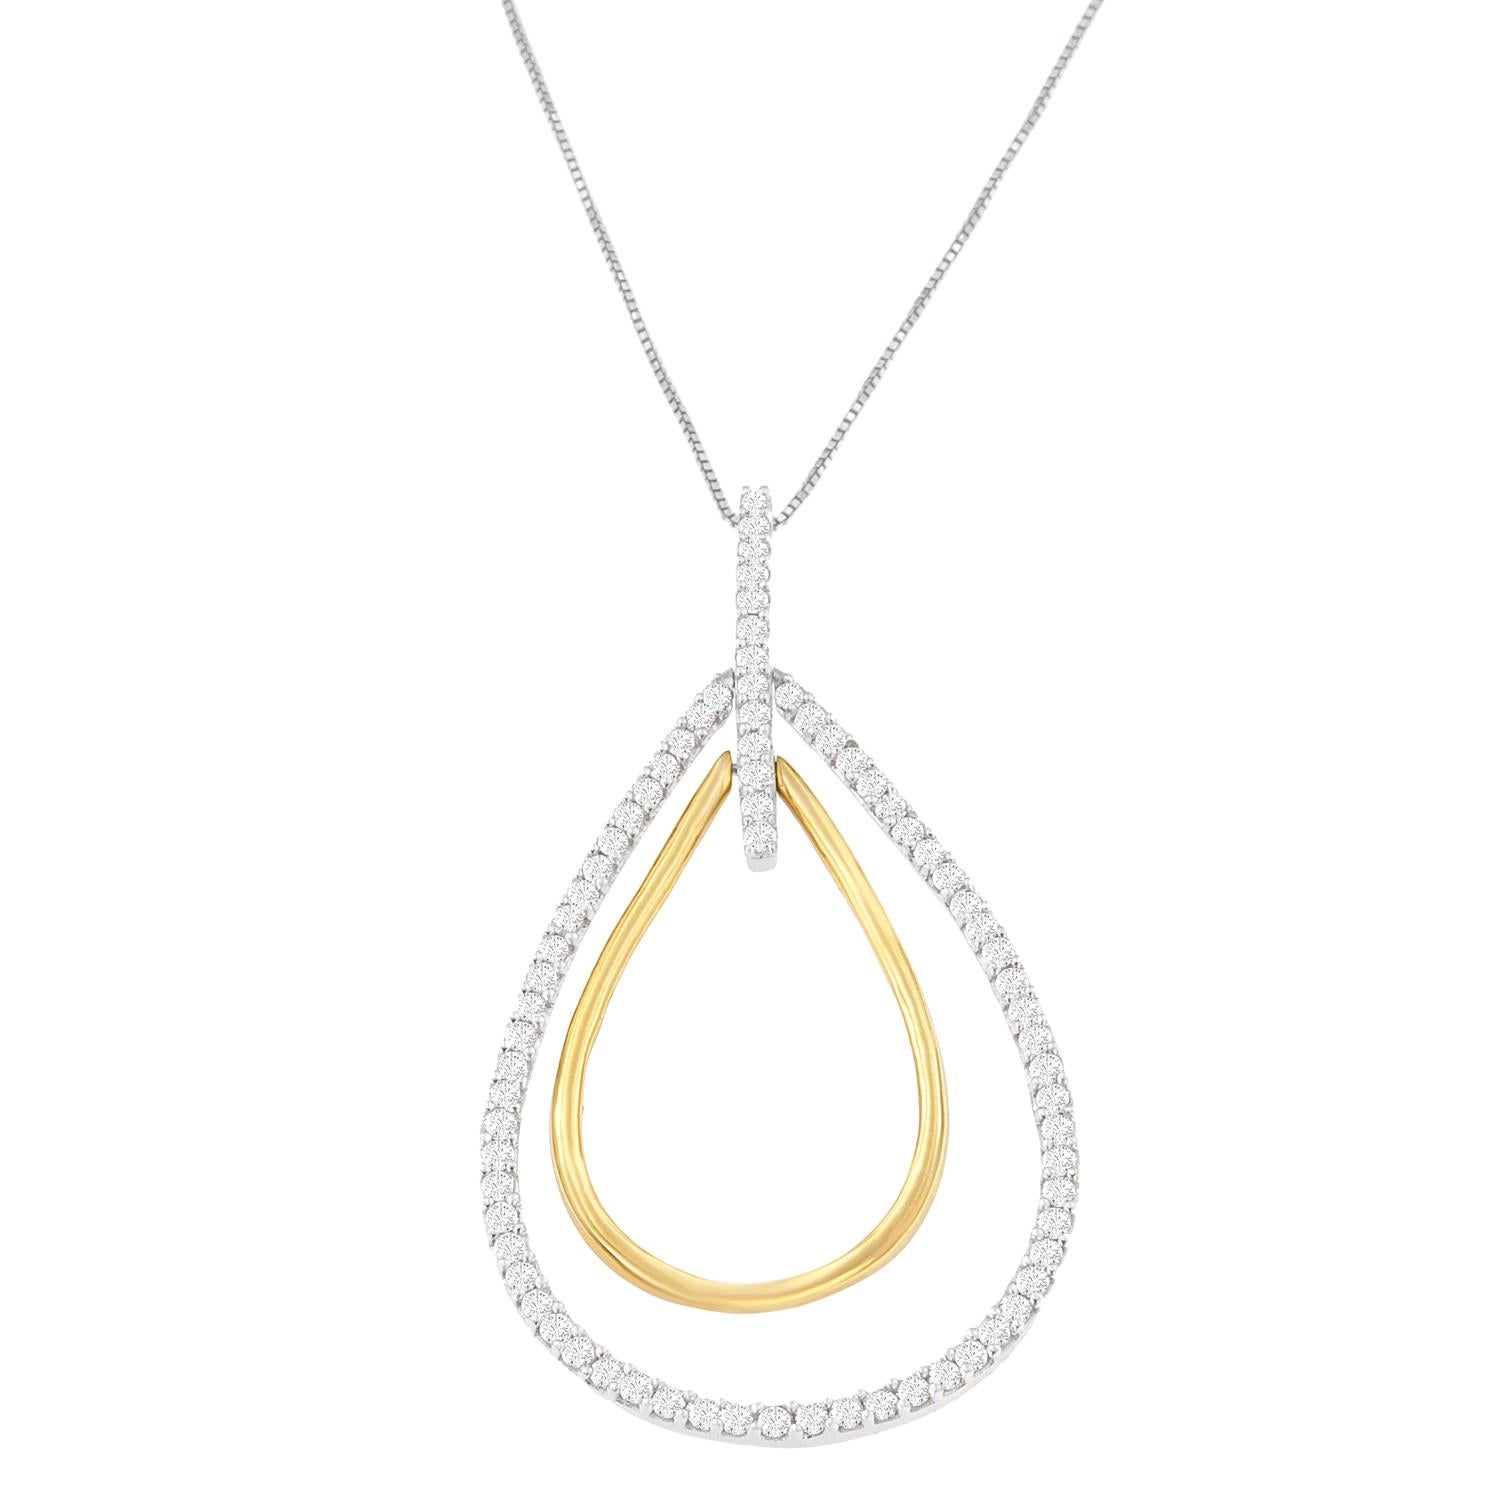 Classic meets contemporary for a chic contrast! This eye-catching pendant flaunts an outer burst of white gold, which sparkles with one carat of round diamonds. An inner burst of yellow gold completes the look for impeccable style. This beautiful